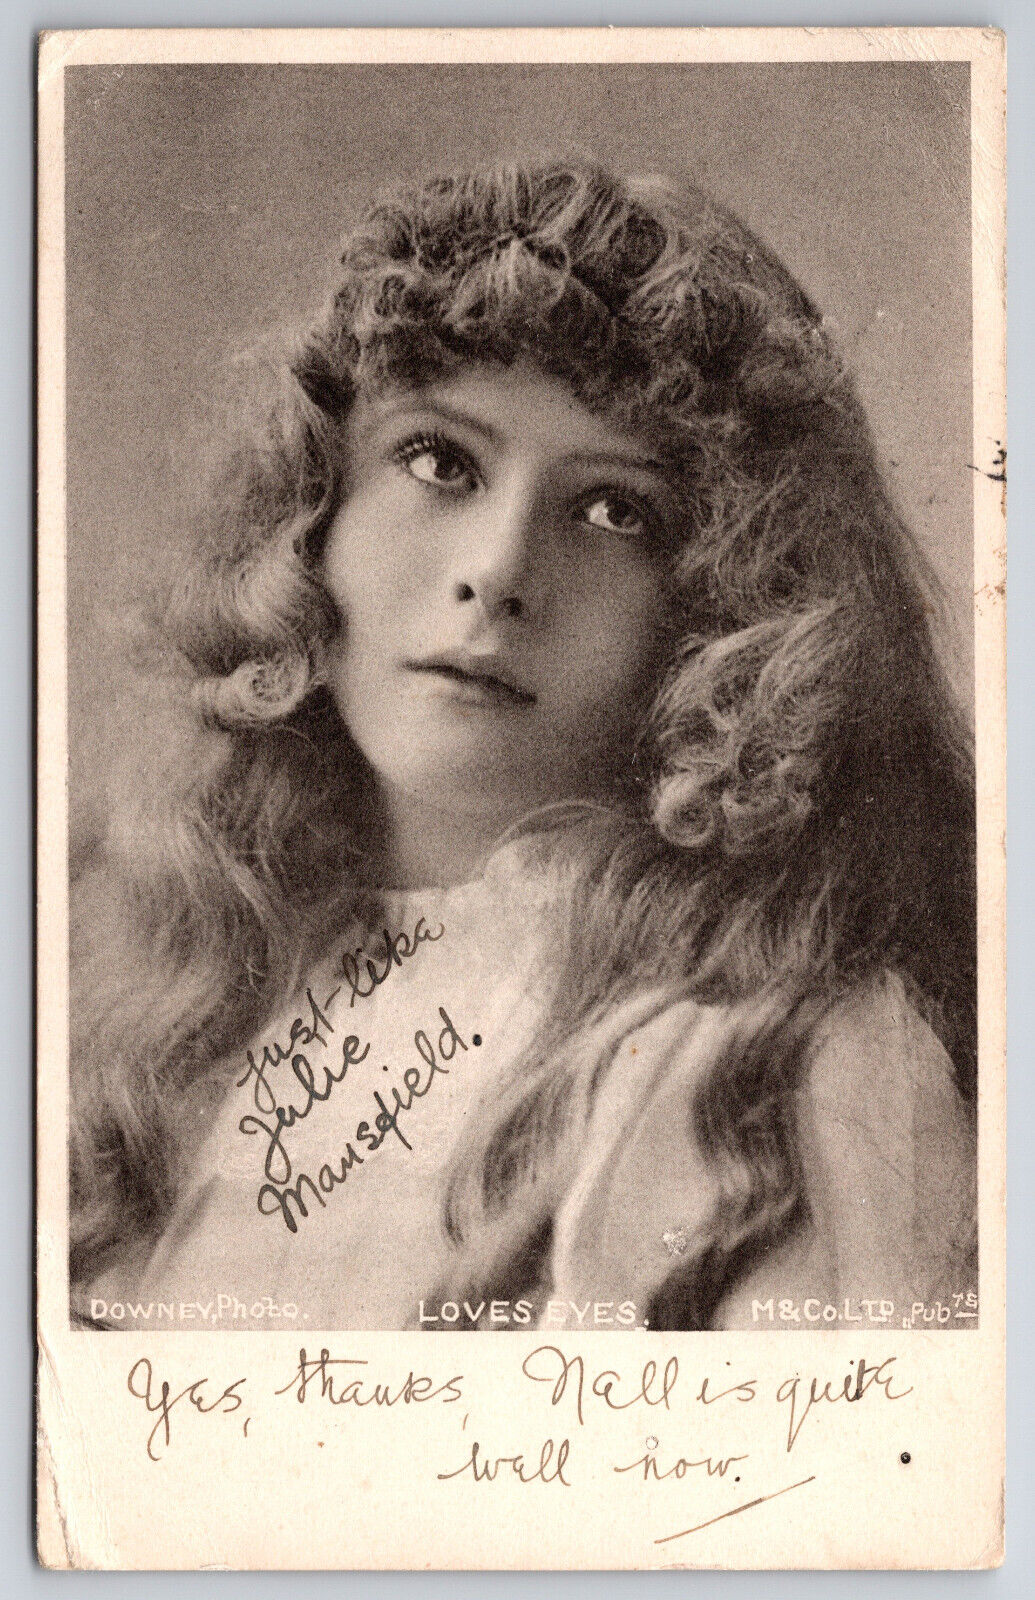 Vintage Postcard Lovely Woman With Long Curly Hair Actress? Posted MY 11 1904